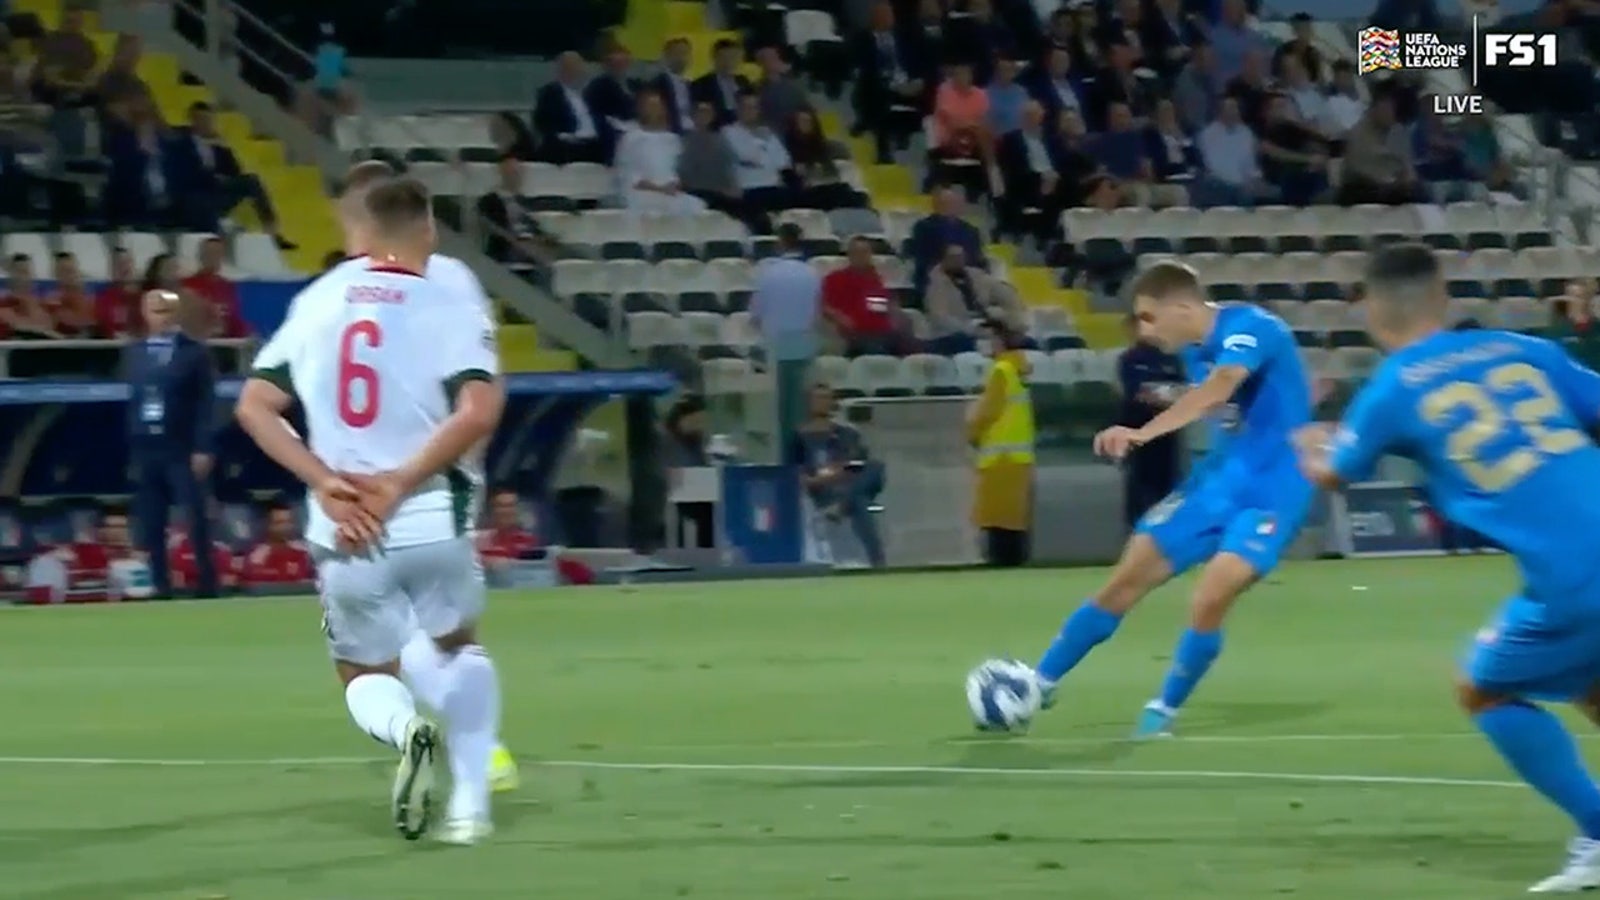 Nicolò Barella scorches one into the back of the net to give Italy the 1-0 lead